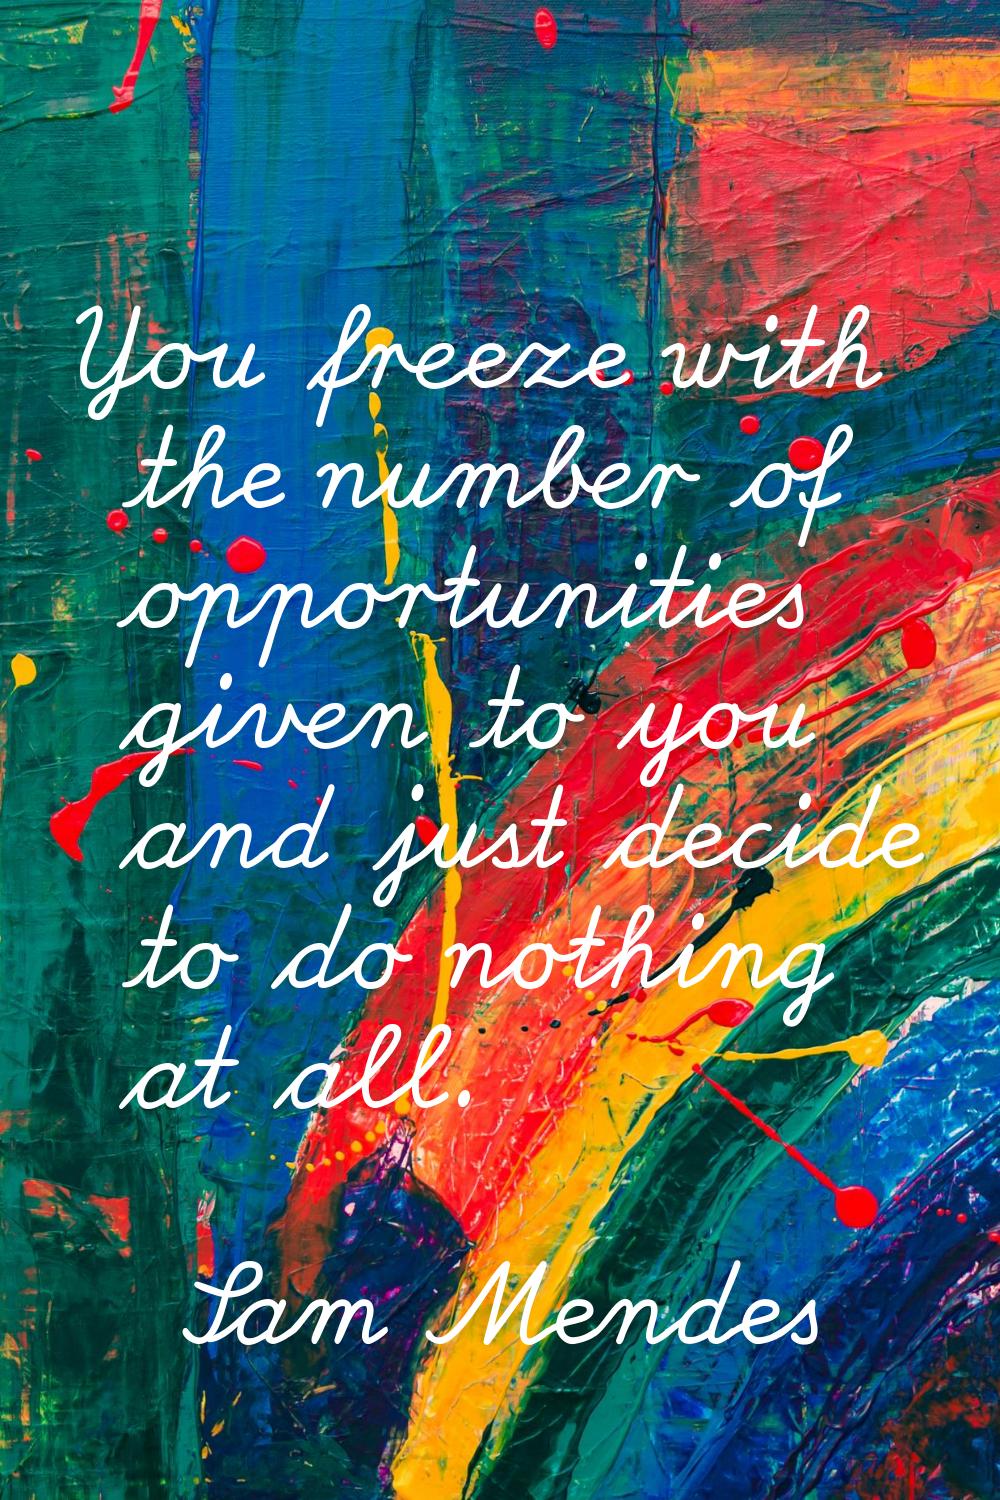 You freeze with the number of opportunities given to you and just decide to do nothing at all.